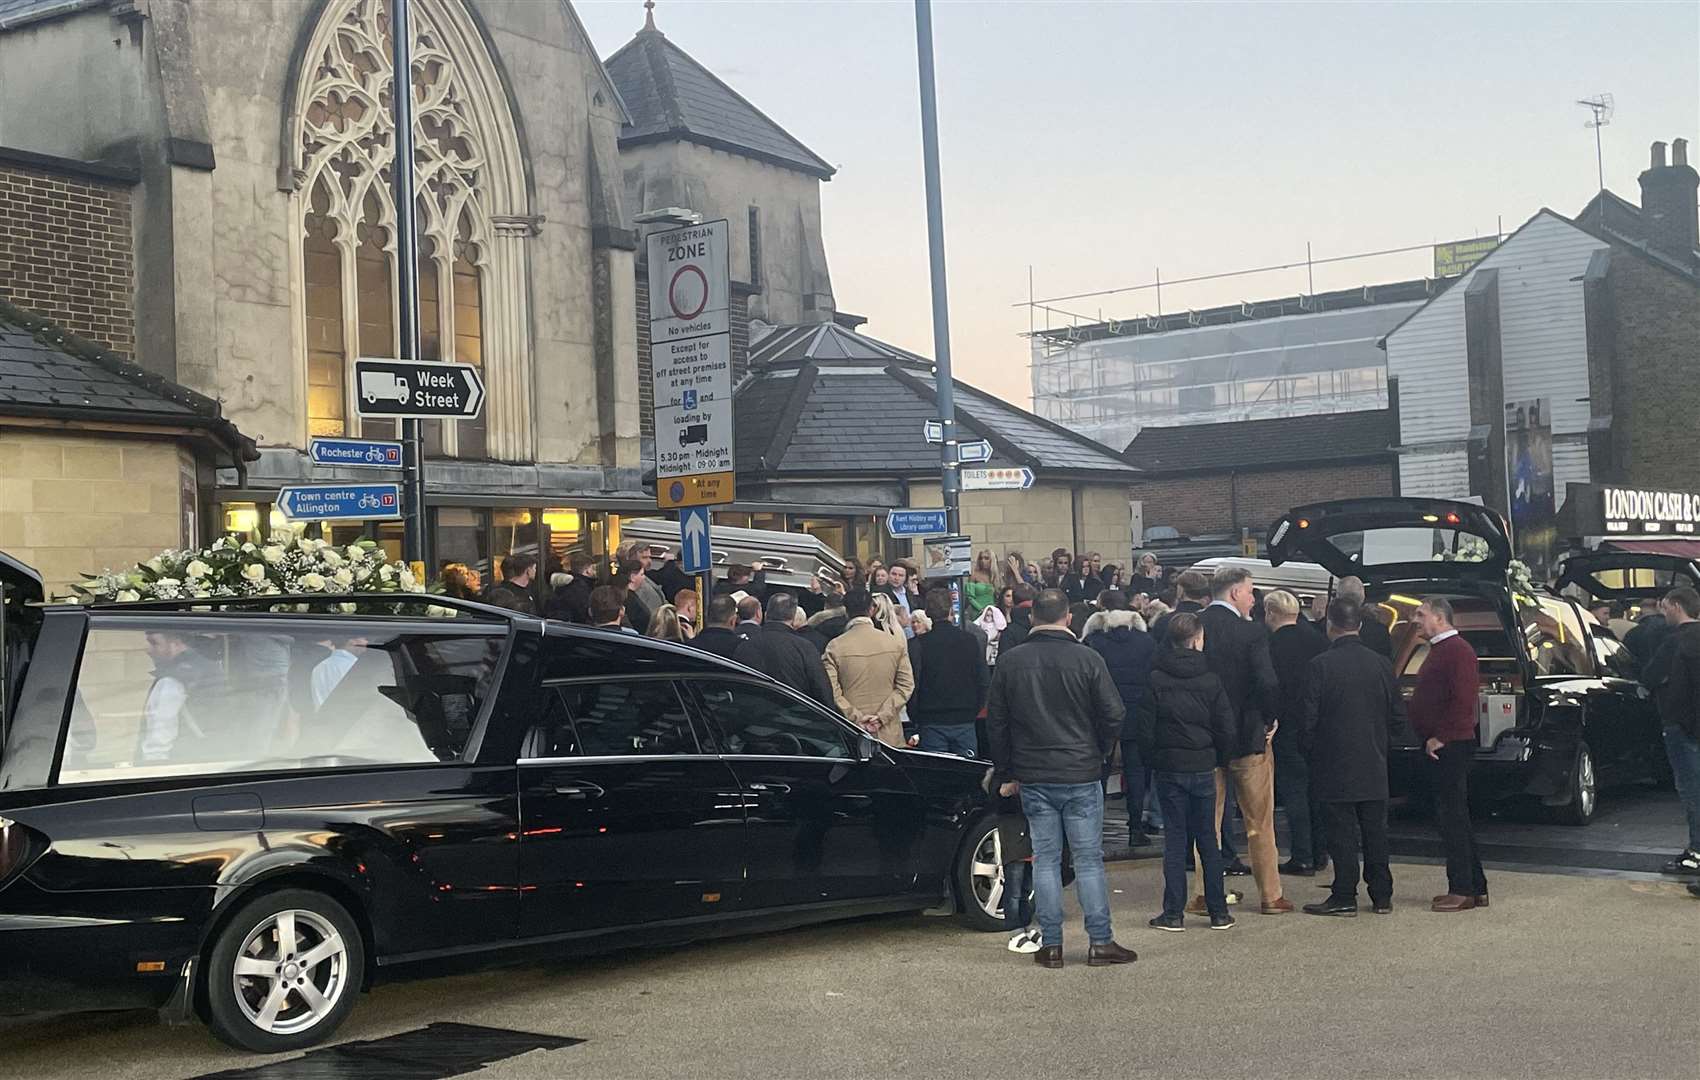 Hundreds gathered outside St Francis Church in Maidstone, where a mass service was held for the four victims of the crash